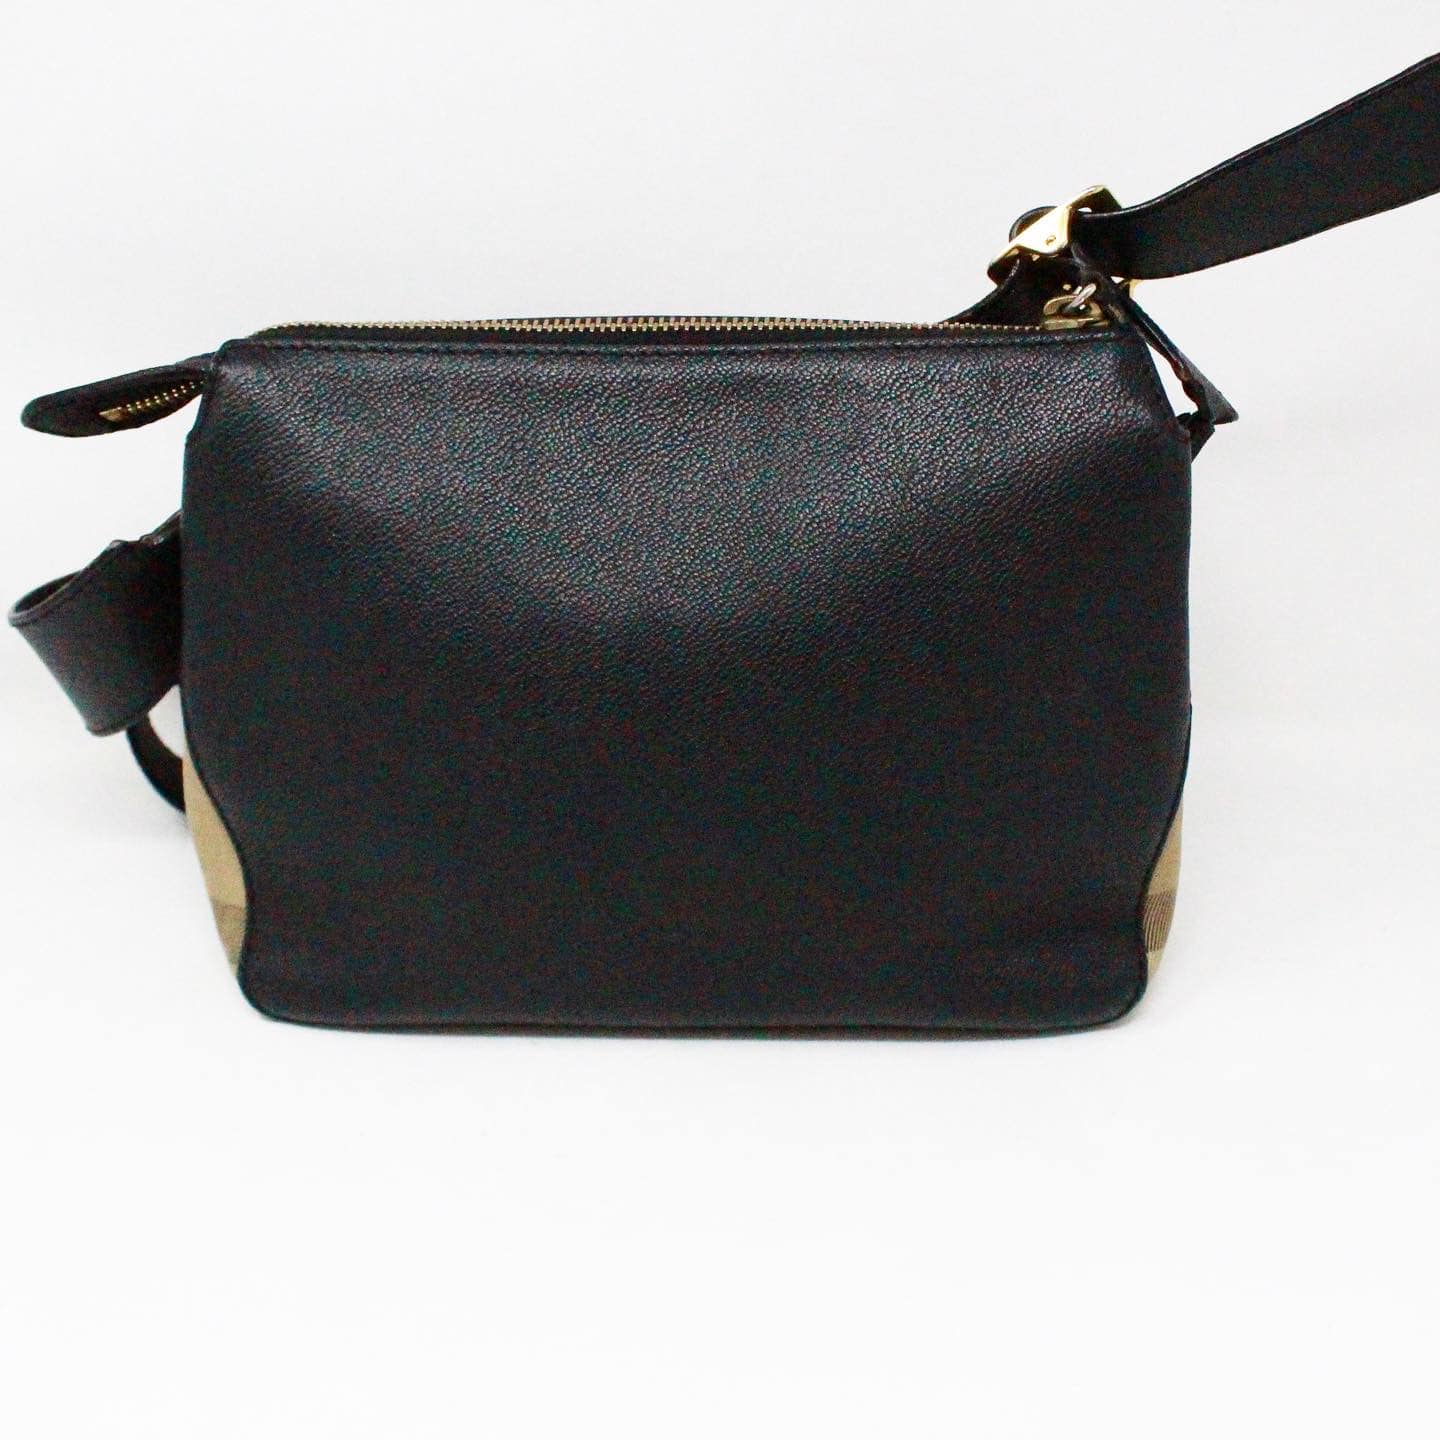 BURBERRY #43131 Helmsley Black Sling Bag – ALL YOUR BLISS